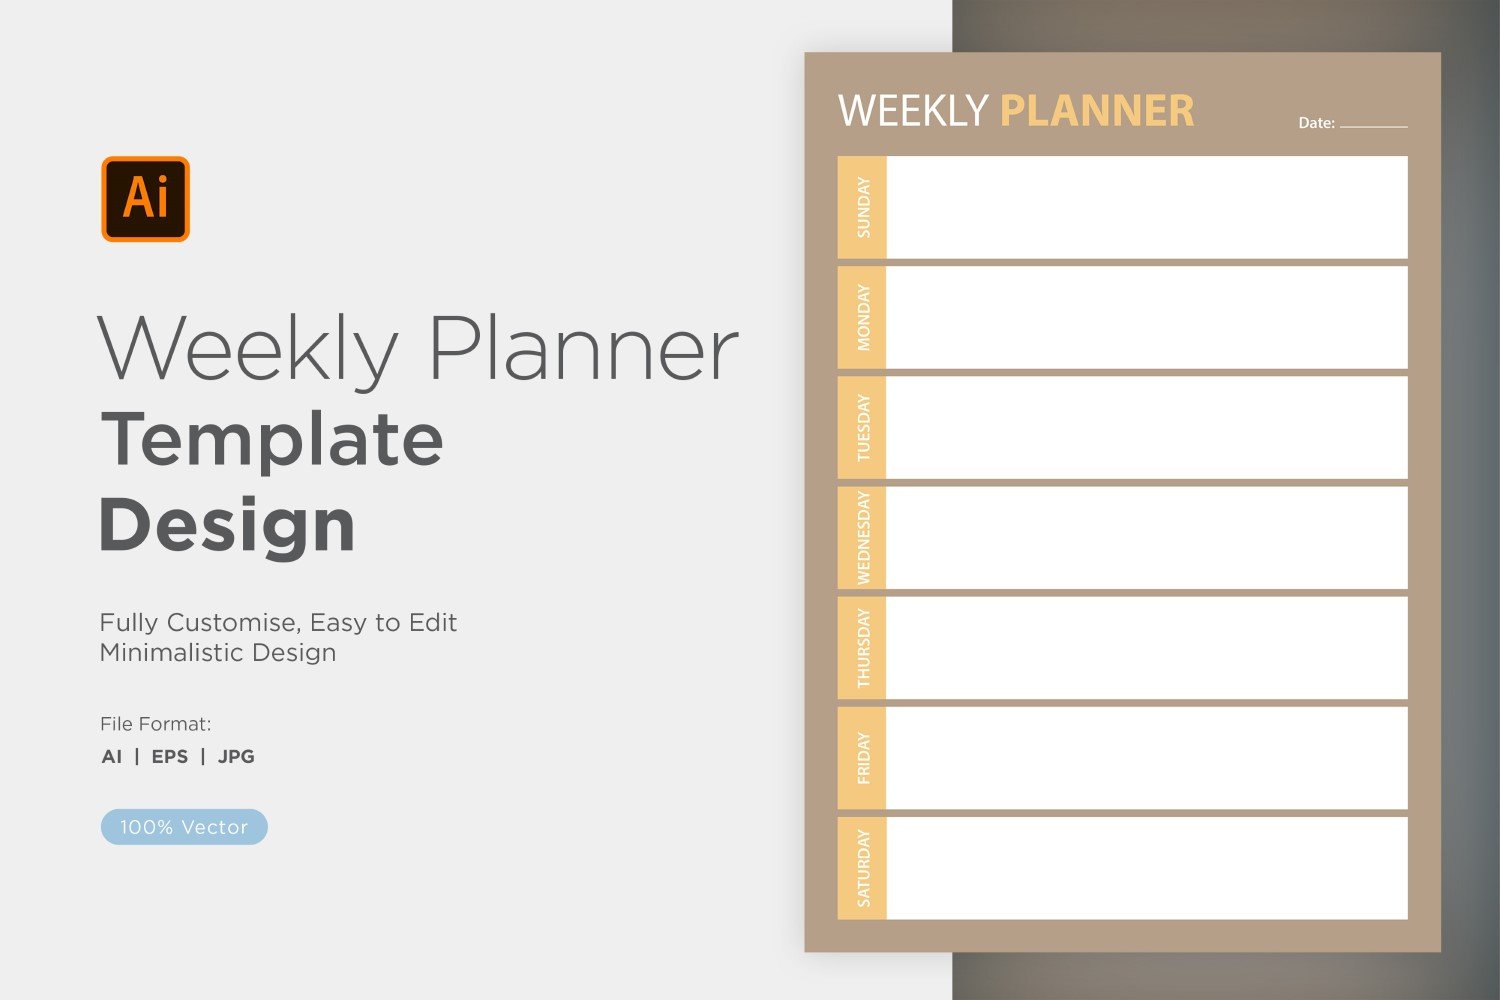 Kit Graphique #357862 Weekly Planner Divers Modles Web - Logo template Preview